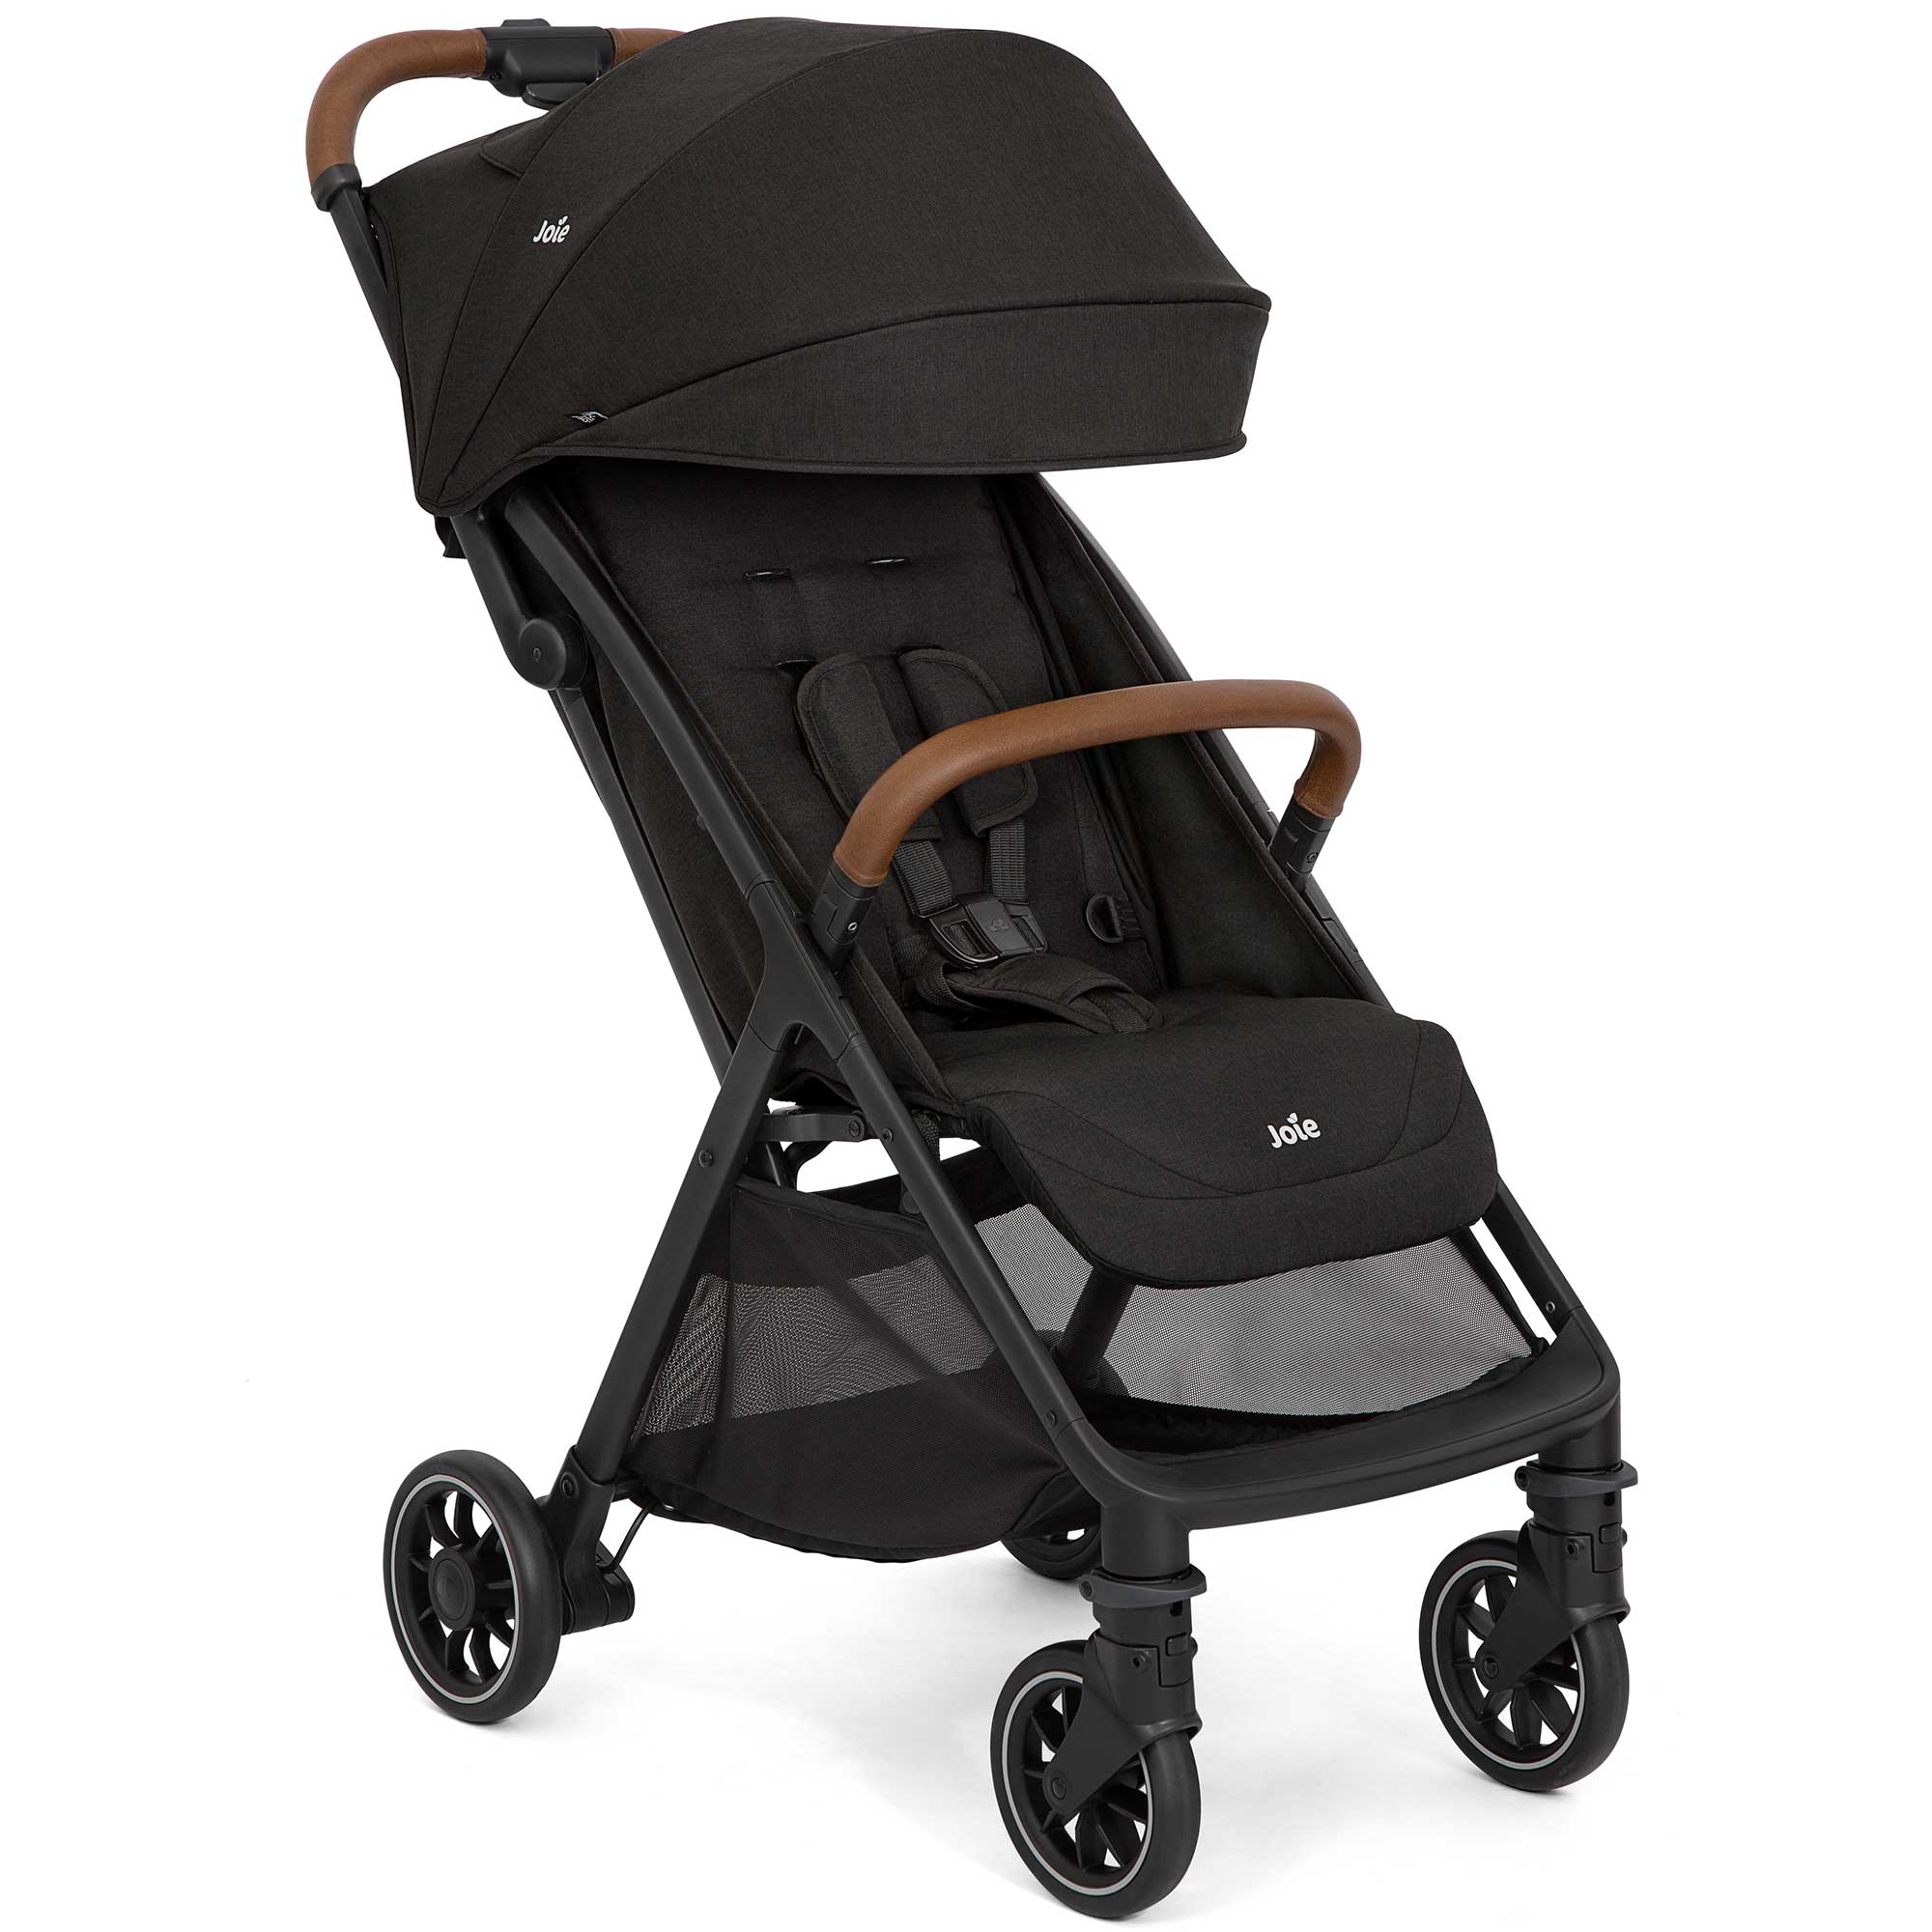 Joie Pushchairs & Buggies Joie Pact Pro Travel Stroller - Shale S2308AASHA000